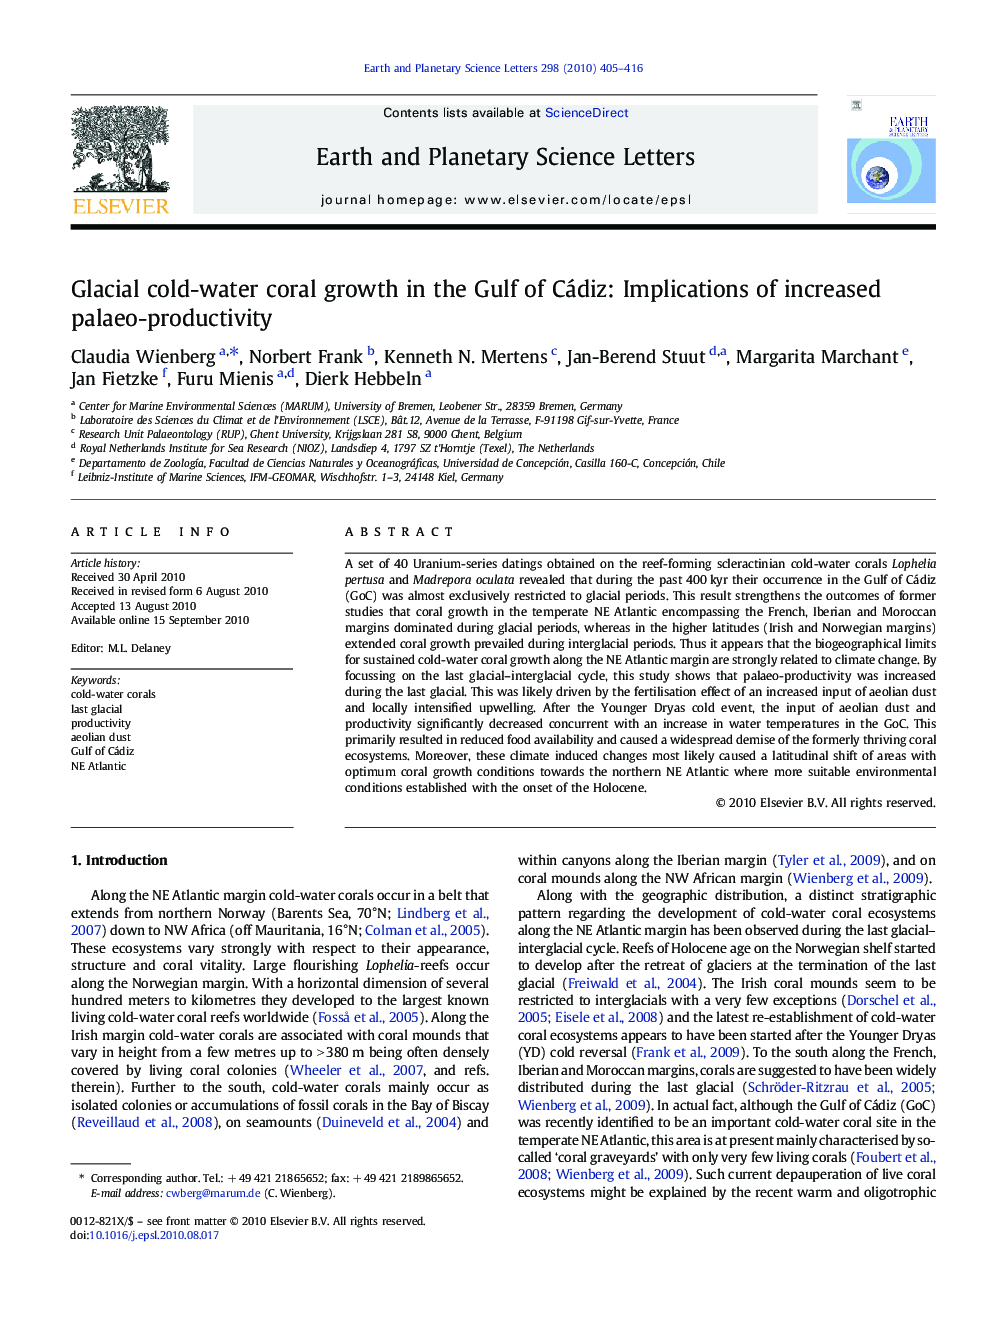 Glacial cold-water coral growth in the Gulf of Cádiz: Implications of increased palaeo-productivity